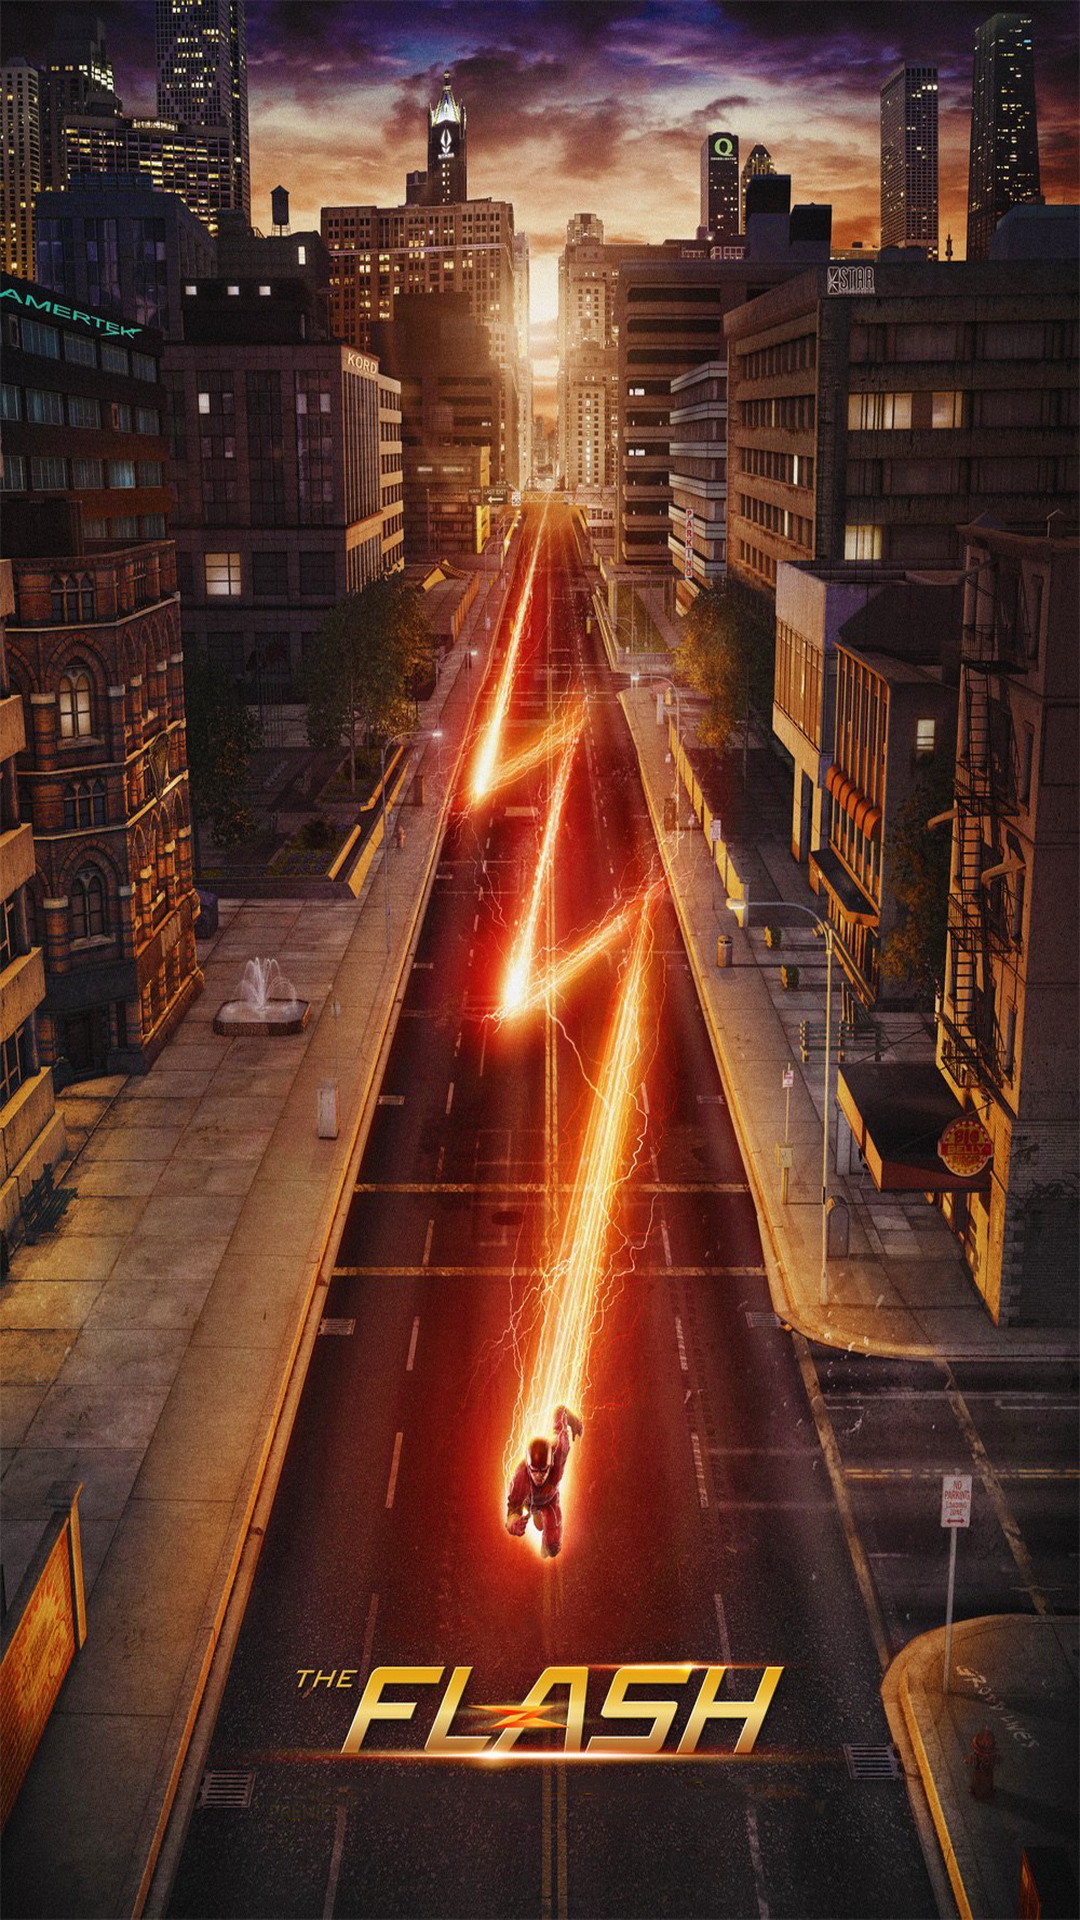 Wallpaper Weekends The Flash For Your Iphone 6 Plus Mactrast Iphone13 スマホ壁紙 待受画像ギャラリー